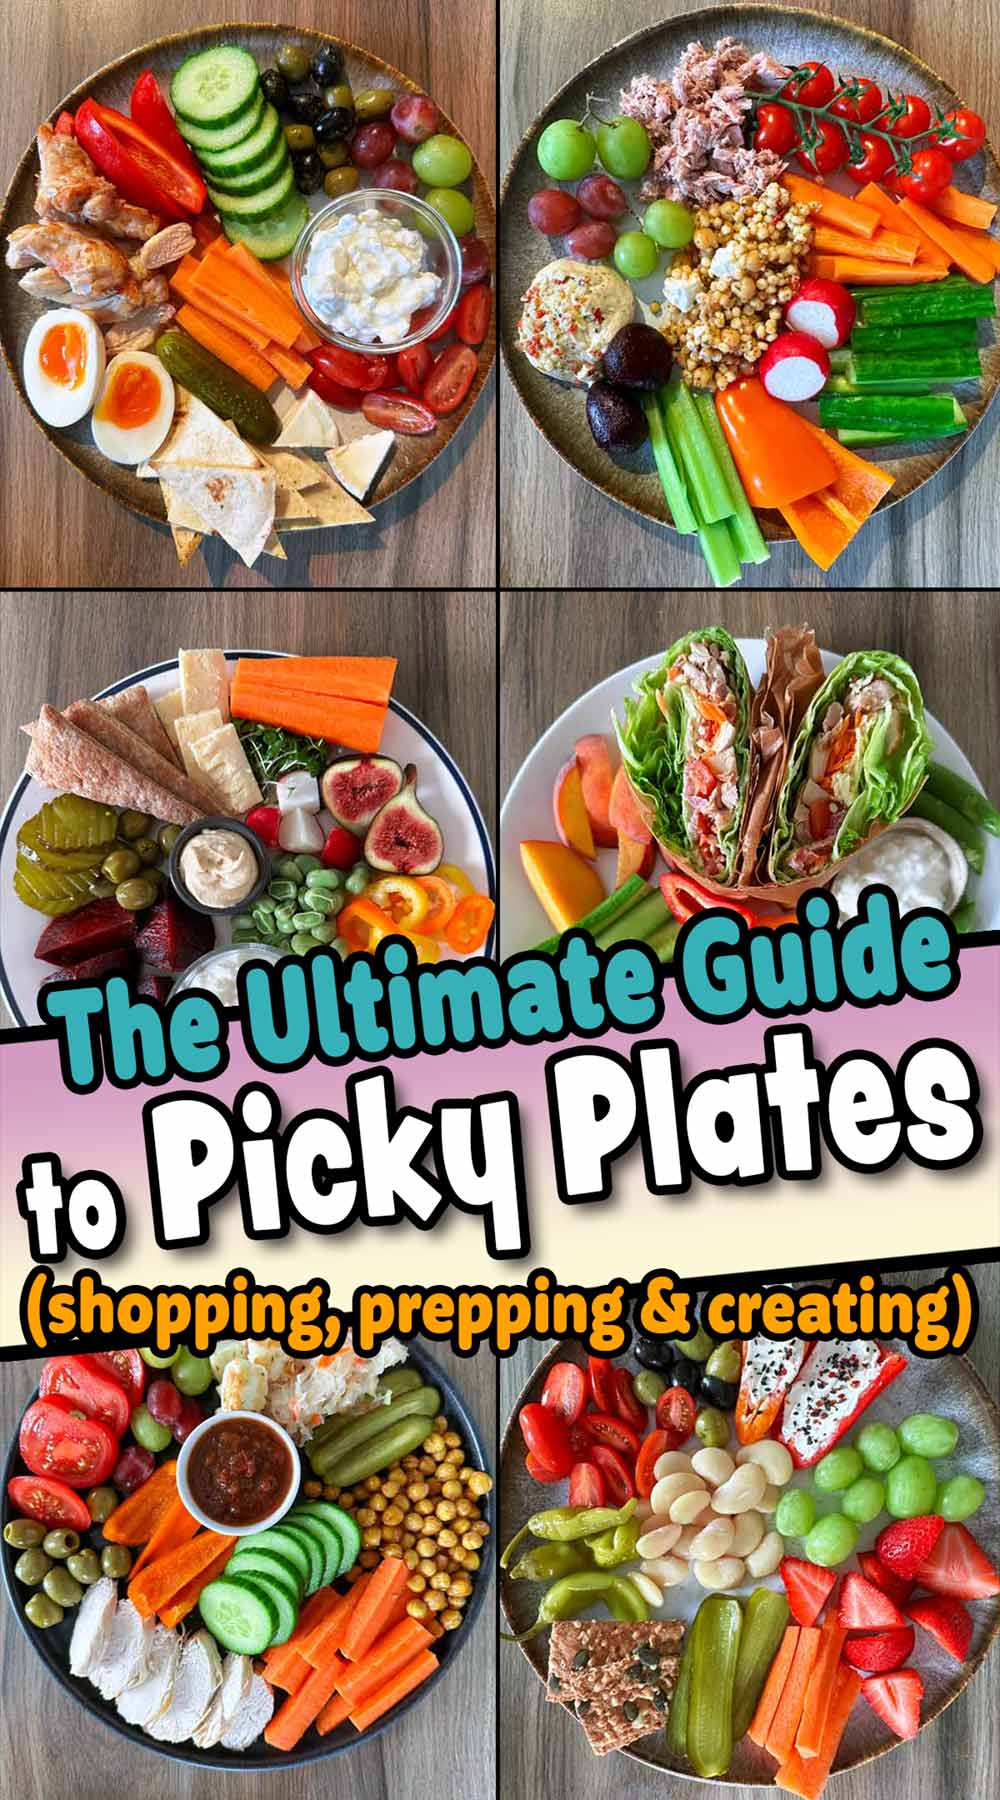 A collage of picky plates with a text title overlay.